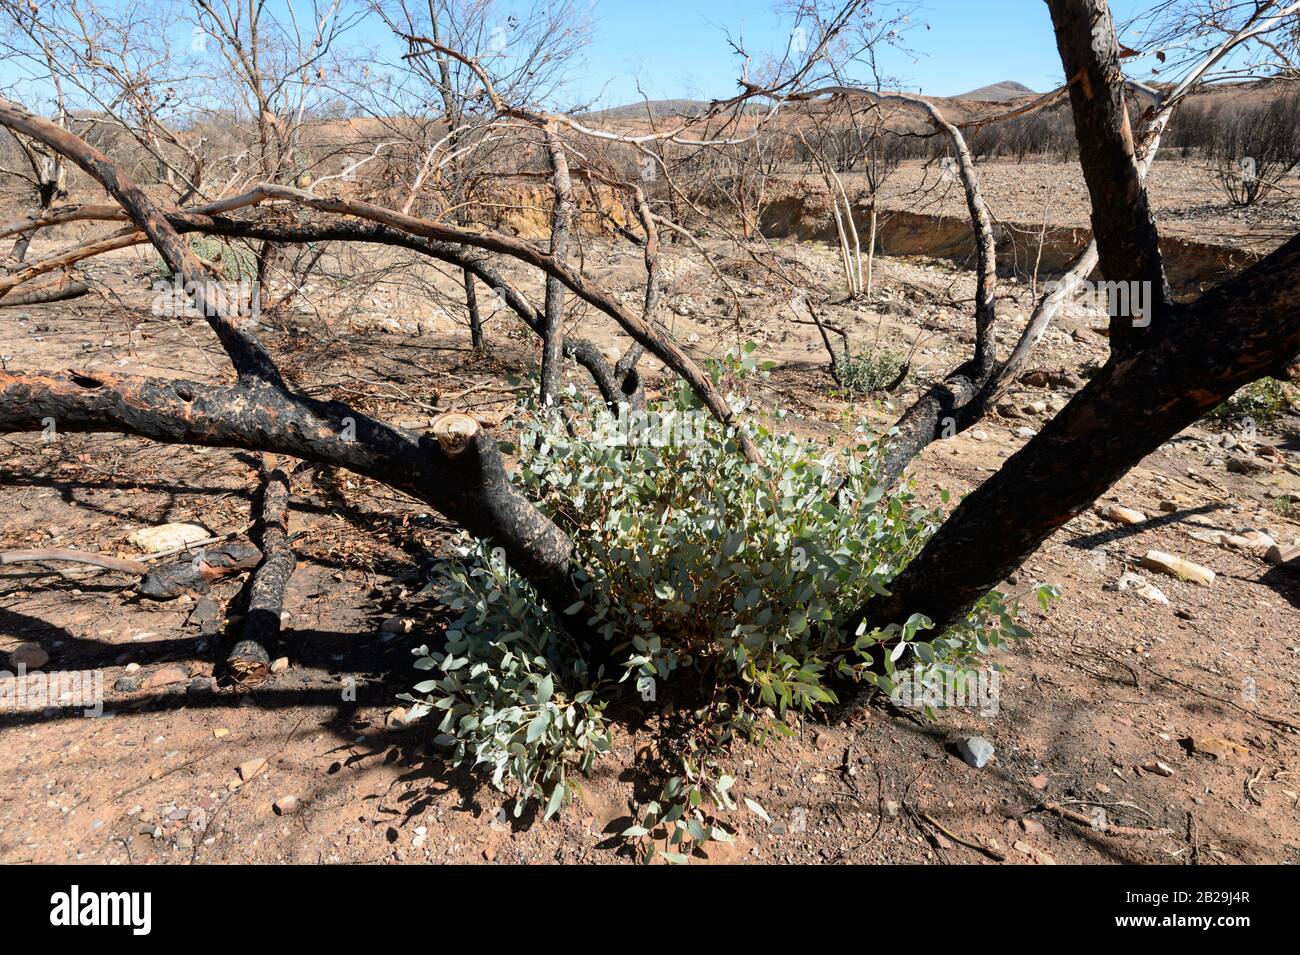 Tree foliage regrowth after a bushfire, West MacDonnell Ranges, Northern Territory, NT, Australia Stock Photo